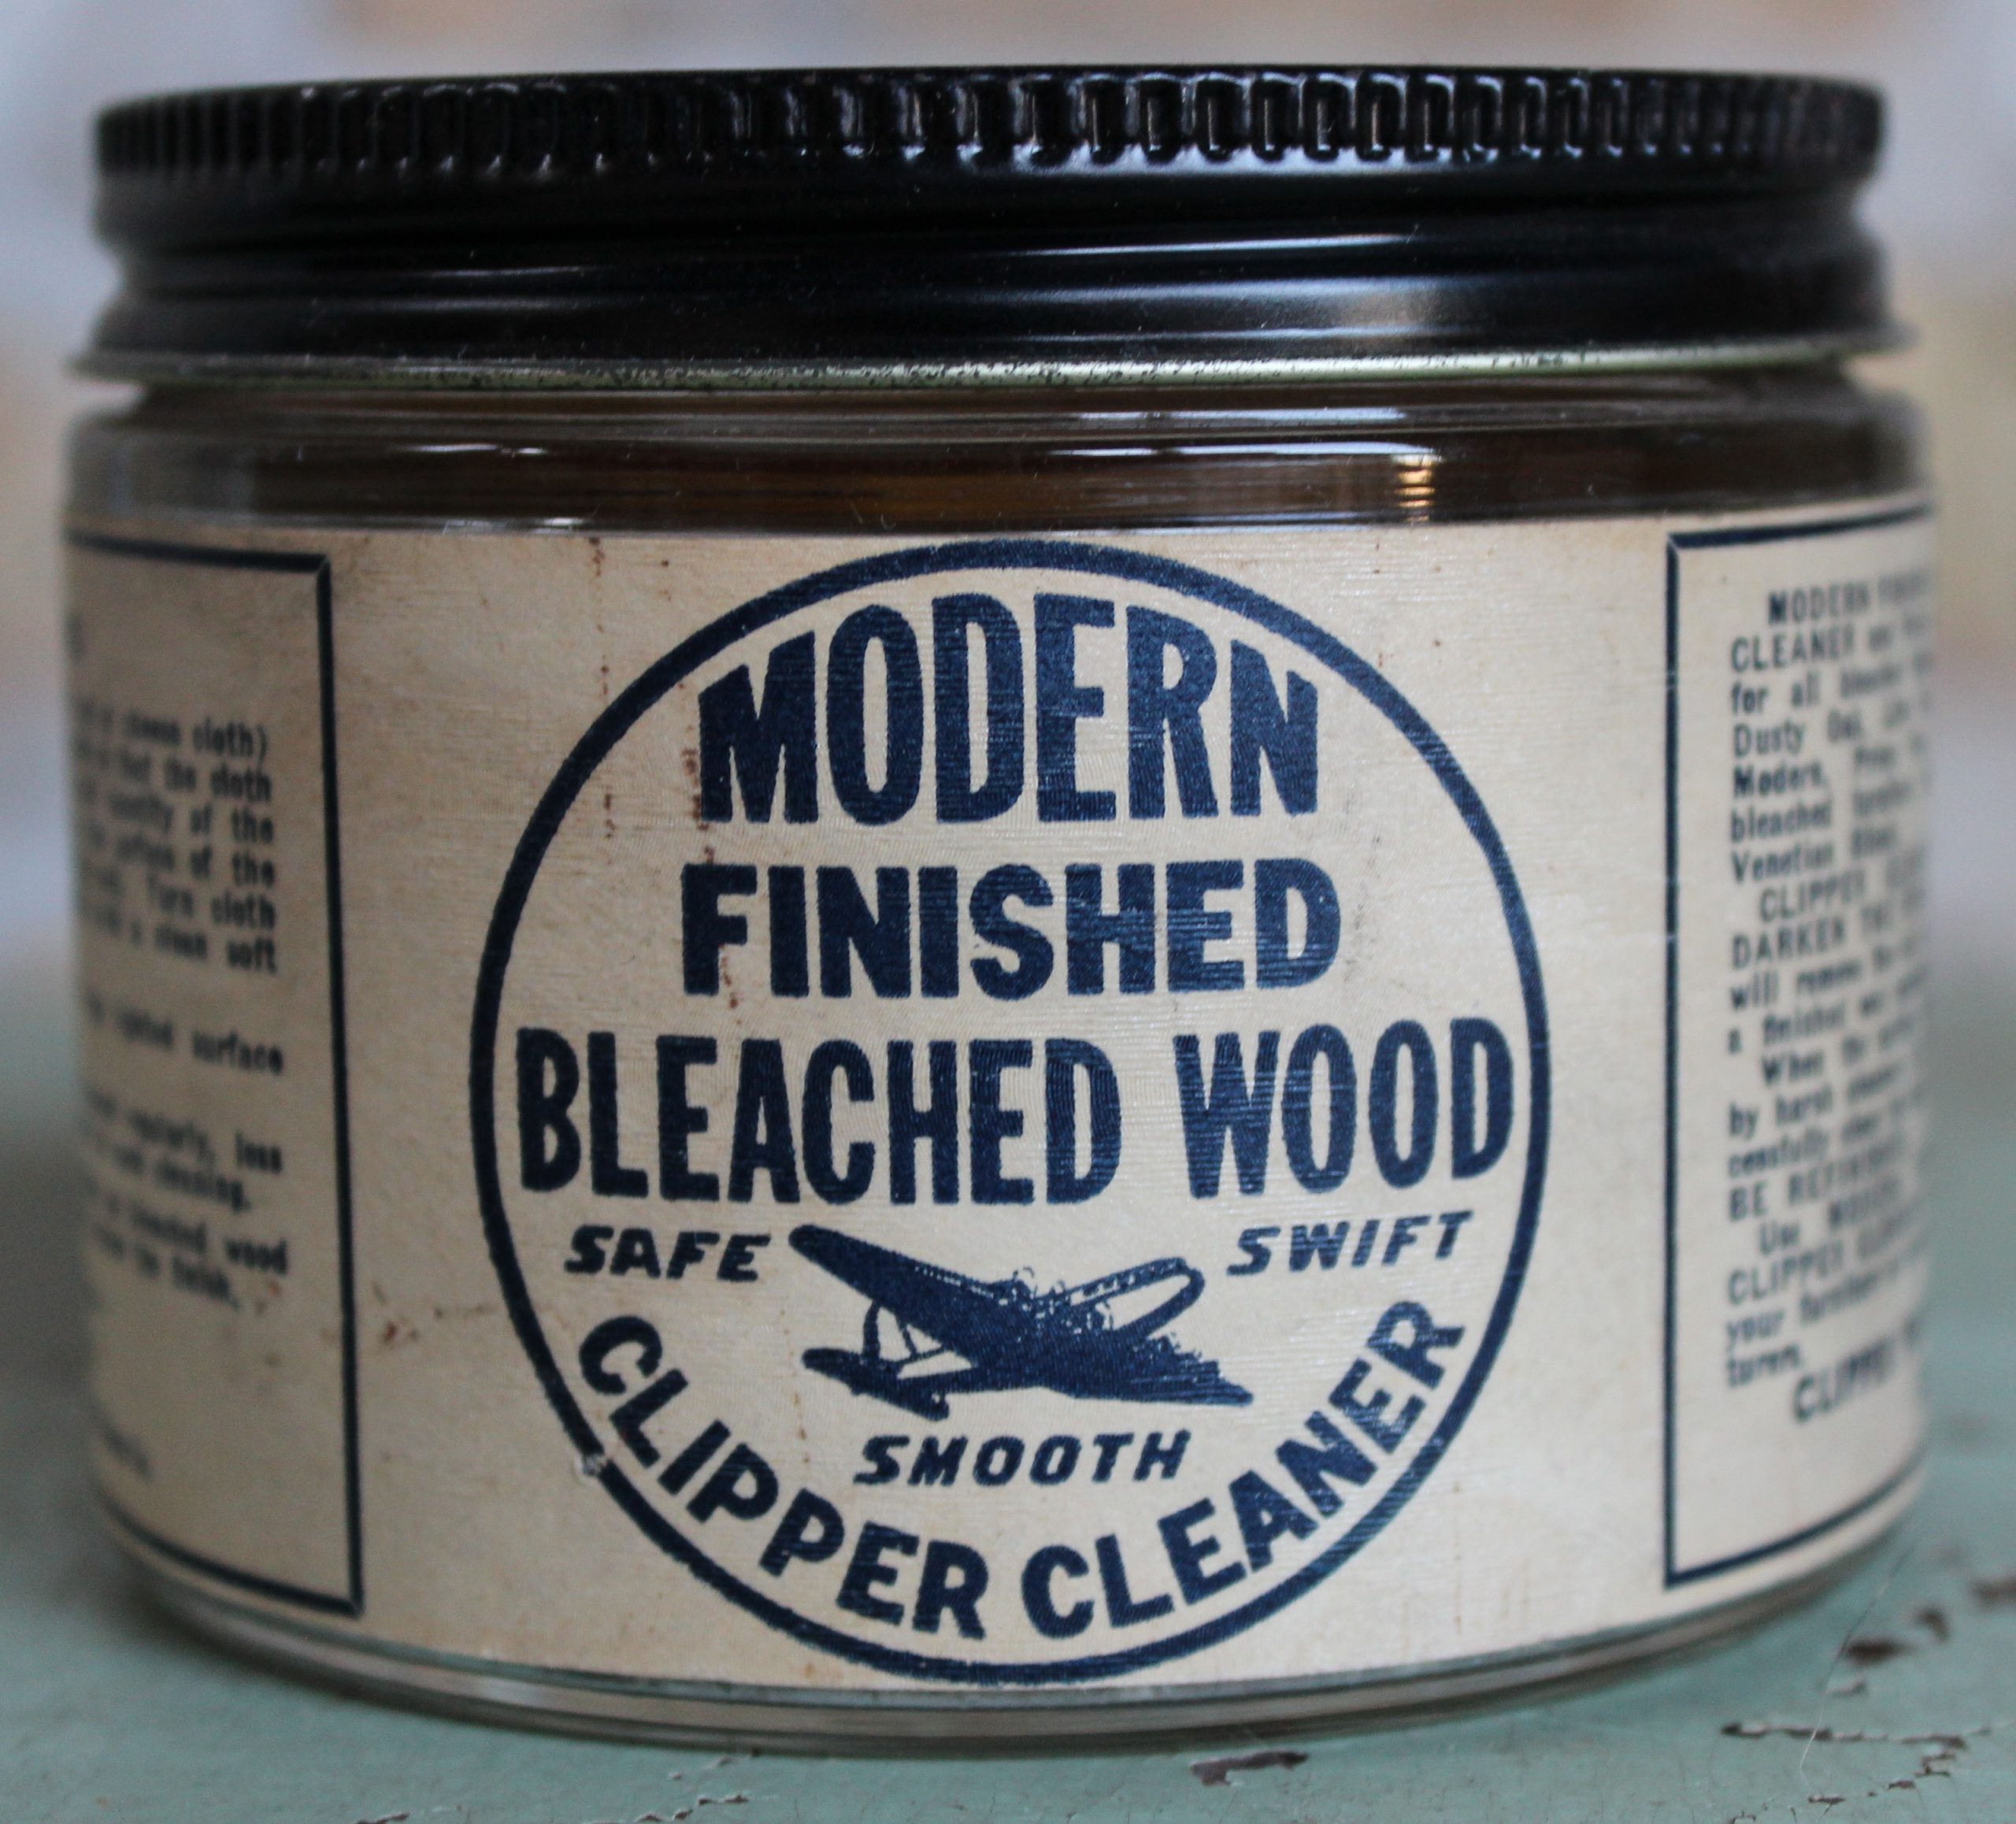 Clipper Products - Clipper Cleaner History